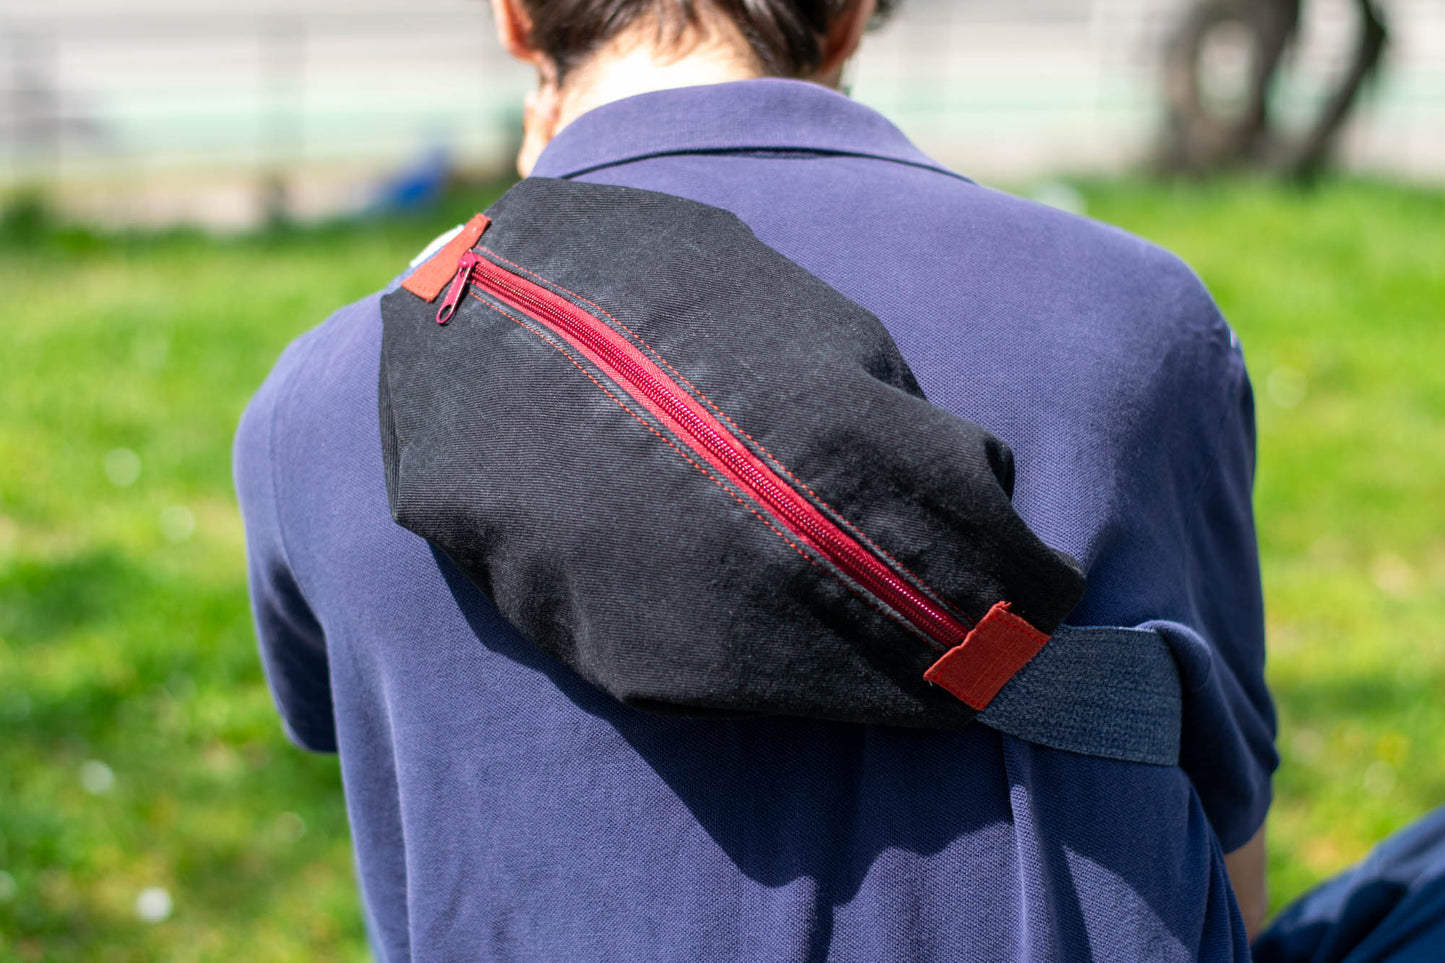 Sling Bag/Waist Pouch Made from Reclaimed Materials — Maroon Zipper and Brick Red Fabric